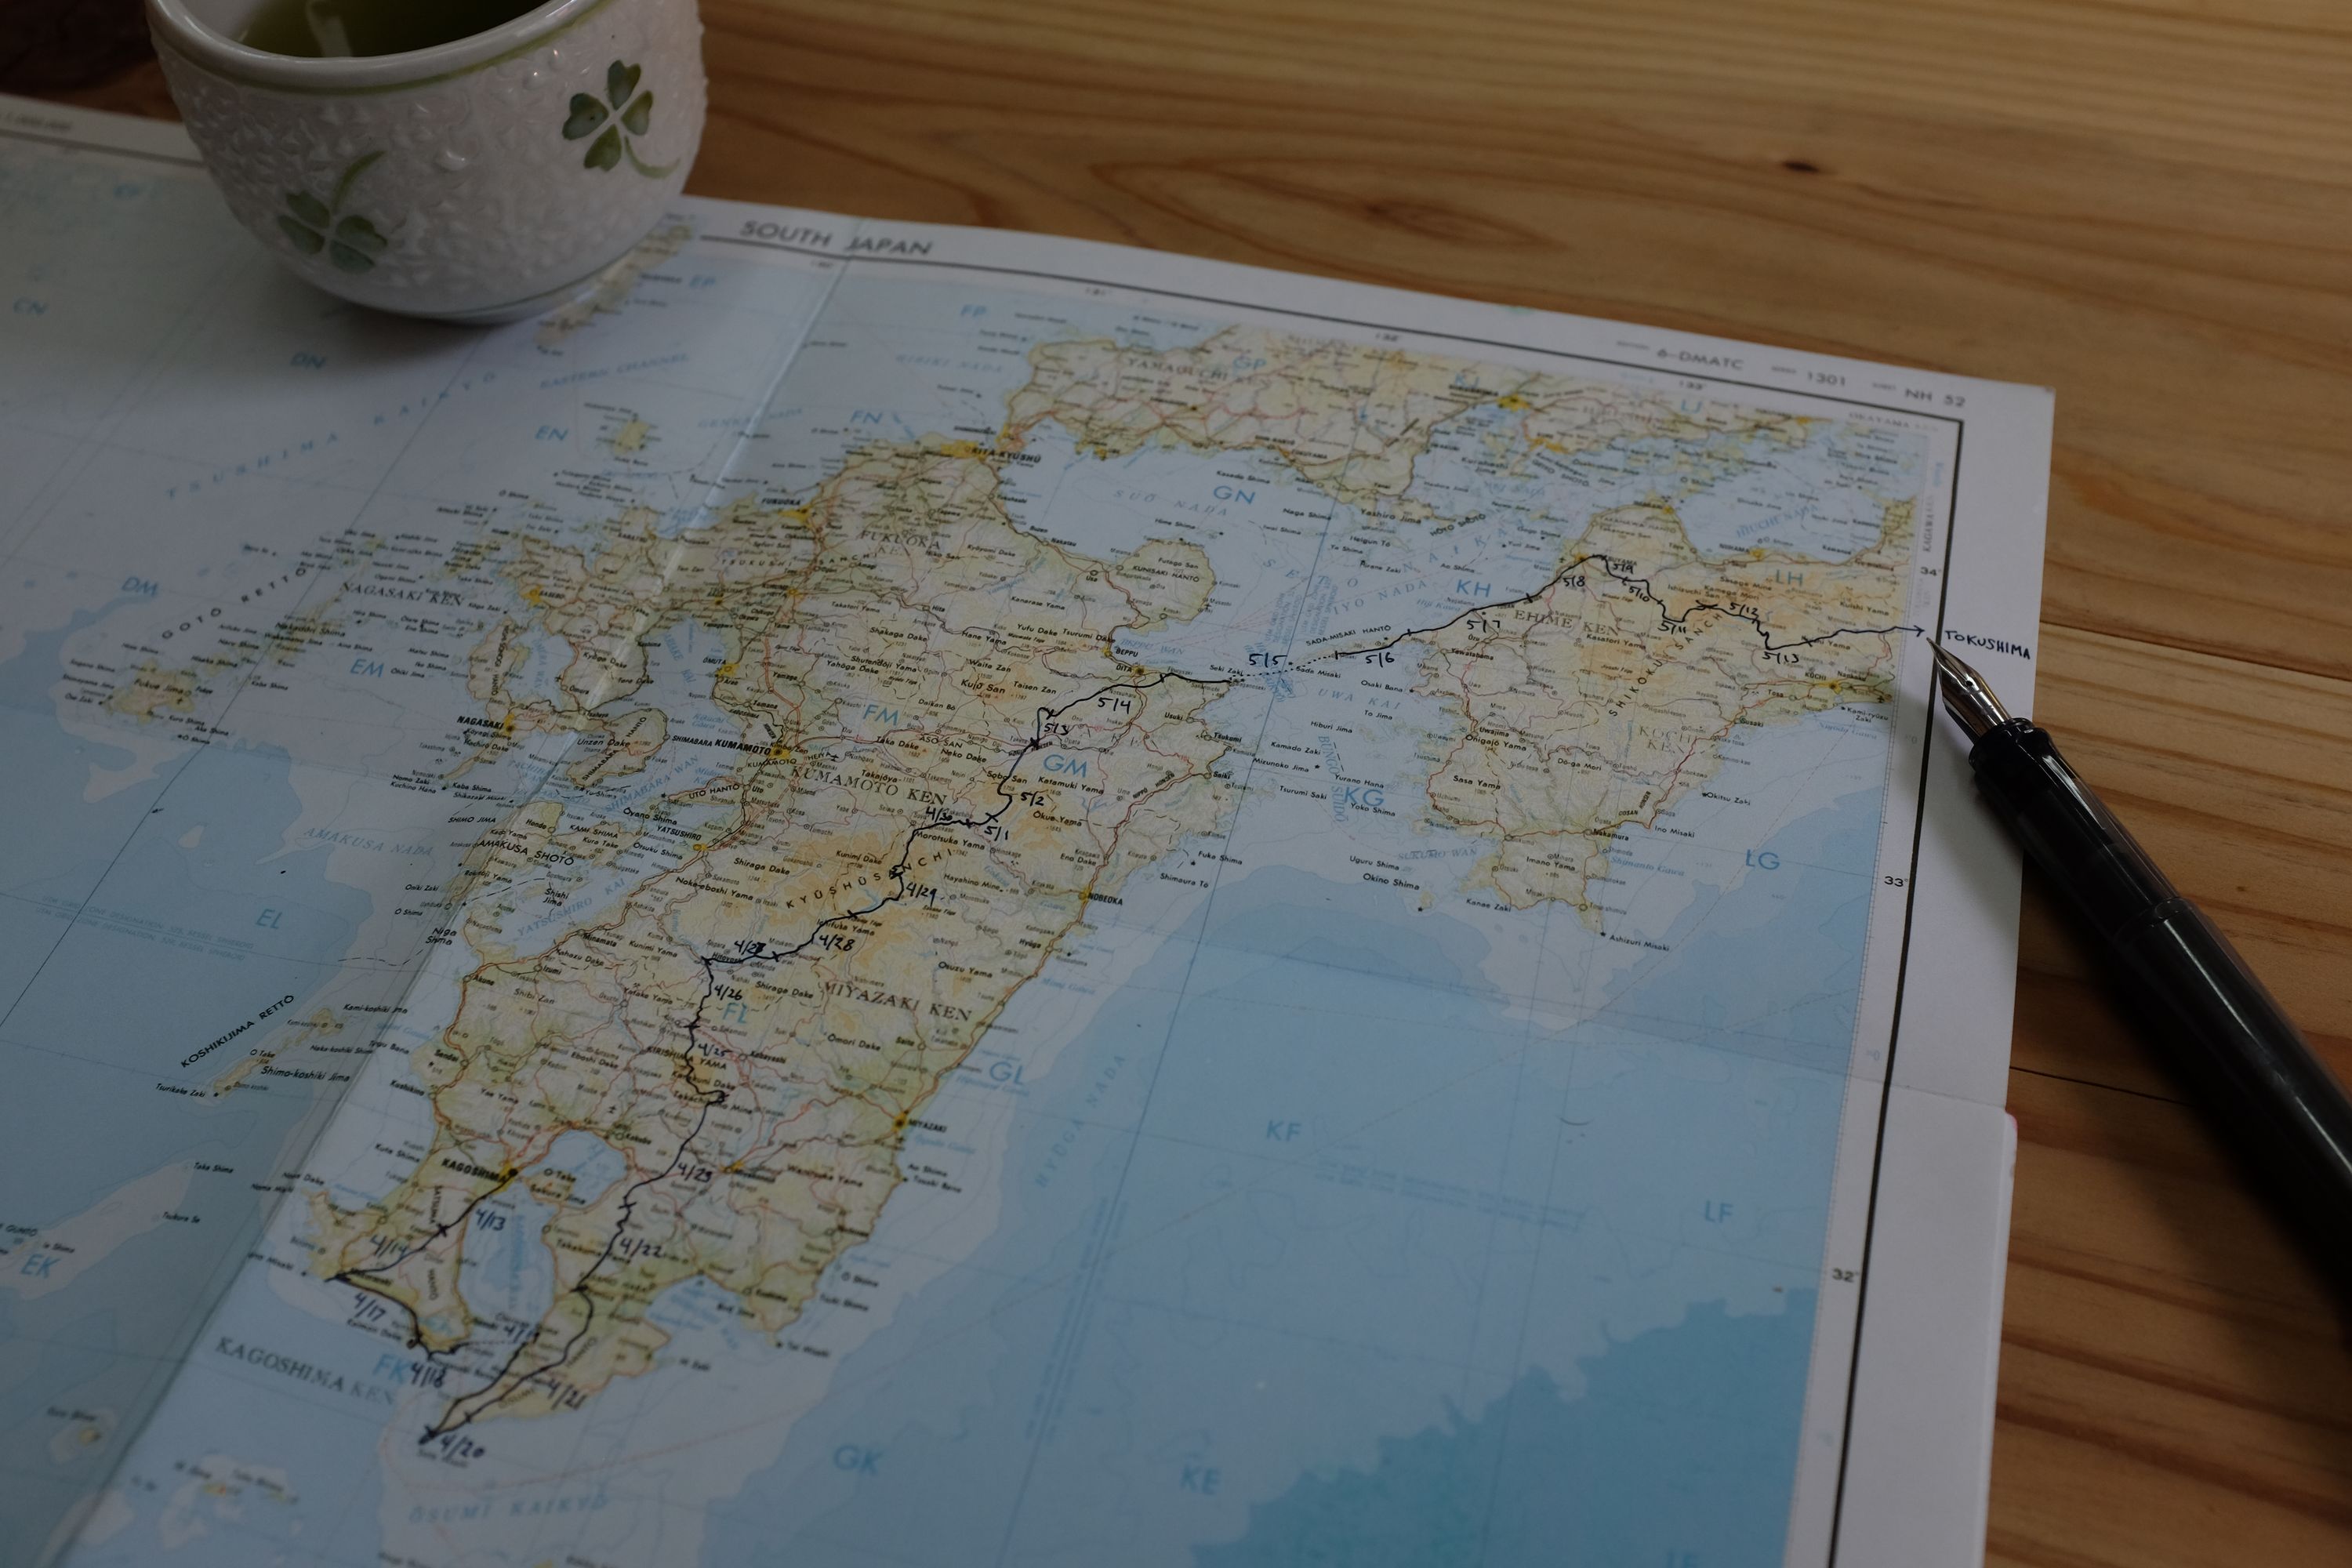 A paper military map of South Japan held down by a teacup, with the route of These Walking Dreams highlighted with a fountain pen; the tip of the pen is visible in the corner.